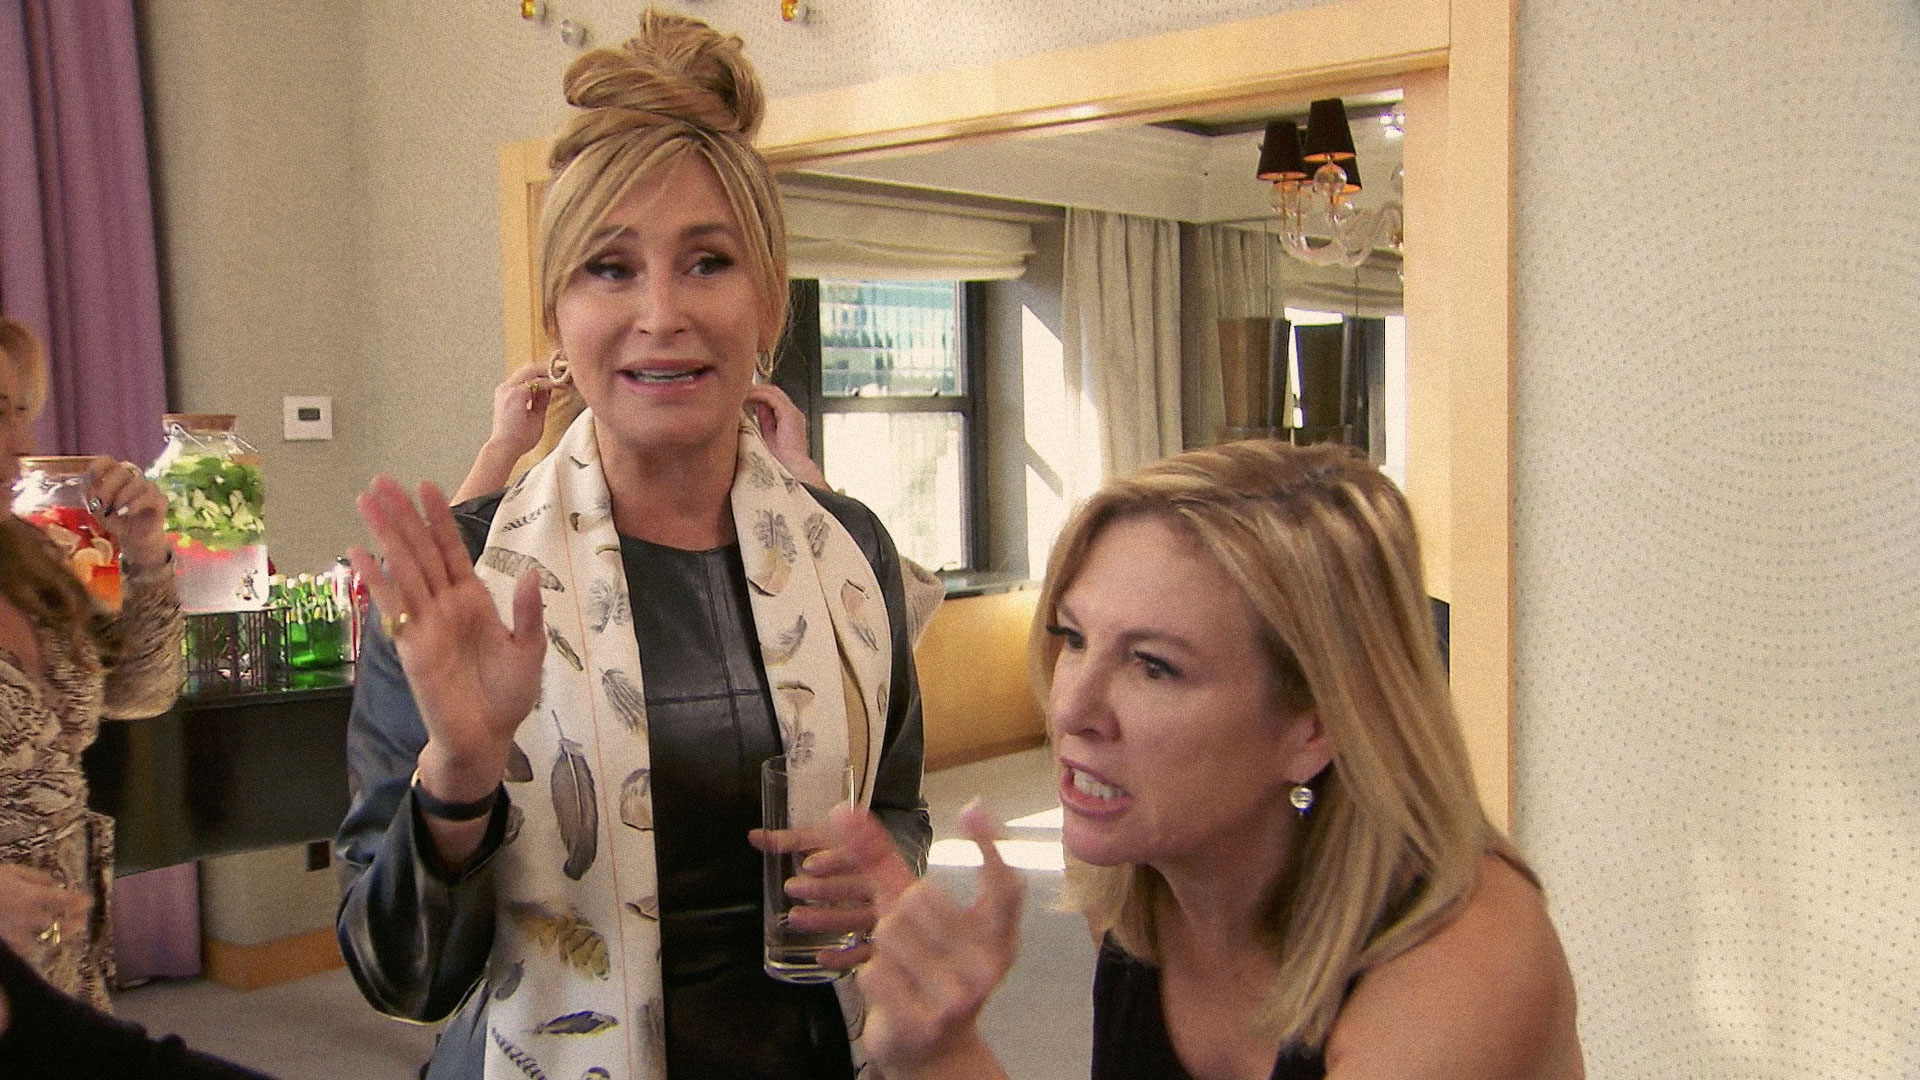 RHONY The Real Housewives of New York City S11E08 saison 11 épisode 8 Birds, Broads and Breakups